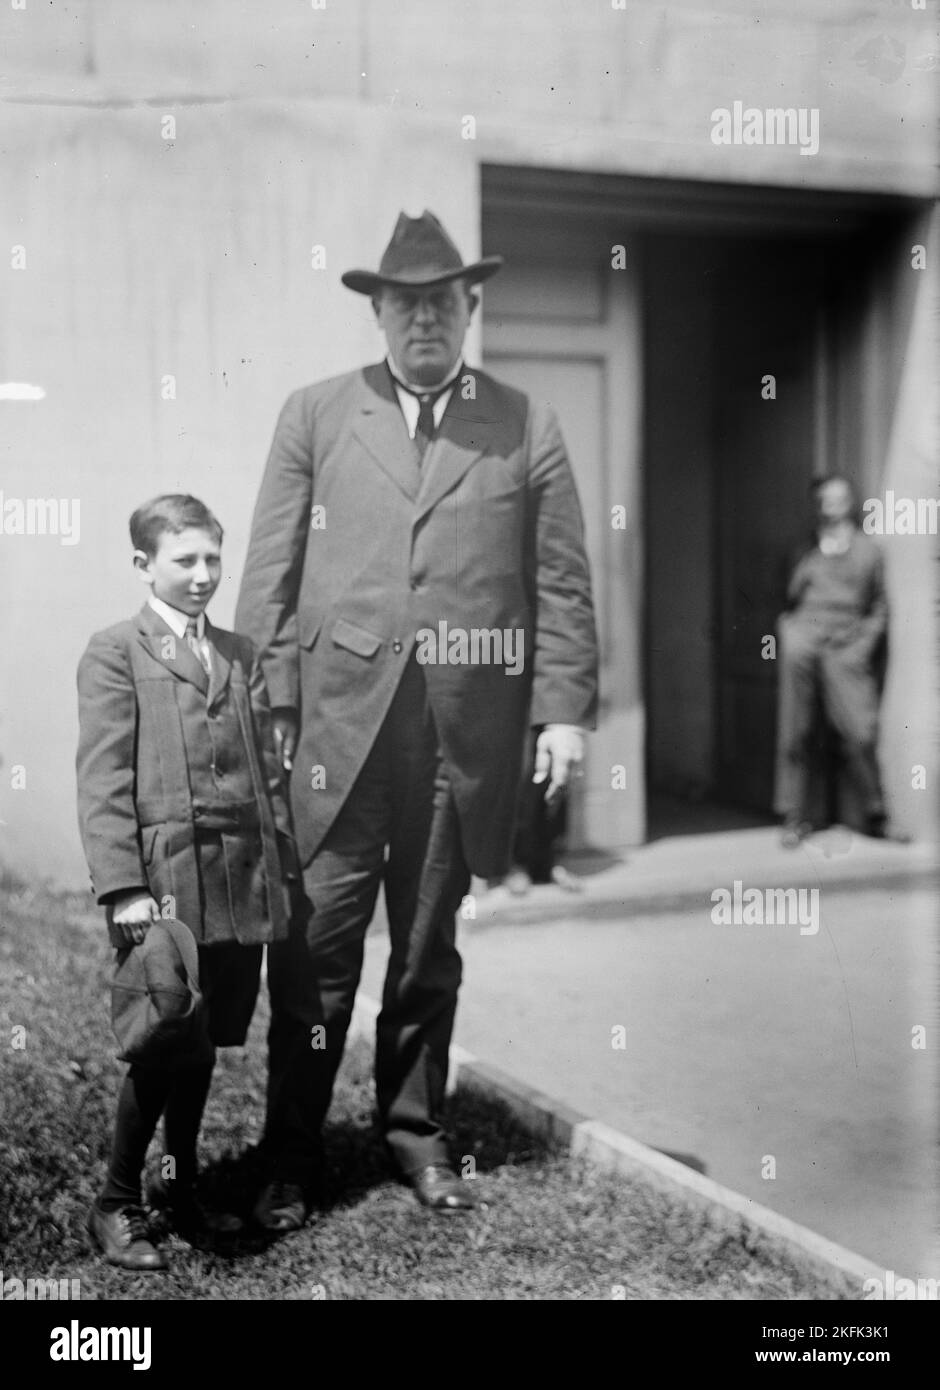 James, Ollie M., Rep. from Kentucky, 1903-1913; Senator, 1913-1918 with Douglas E. Seeley, Youngest Senate Page, 1913. Stock Photo